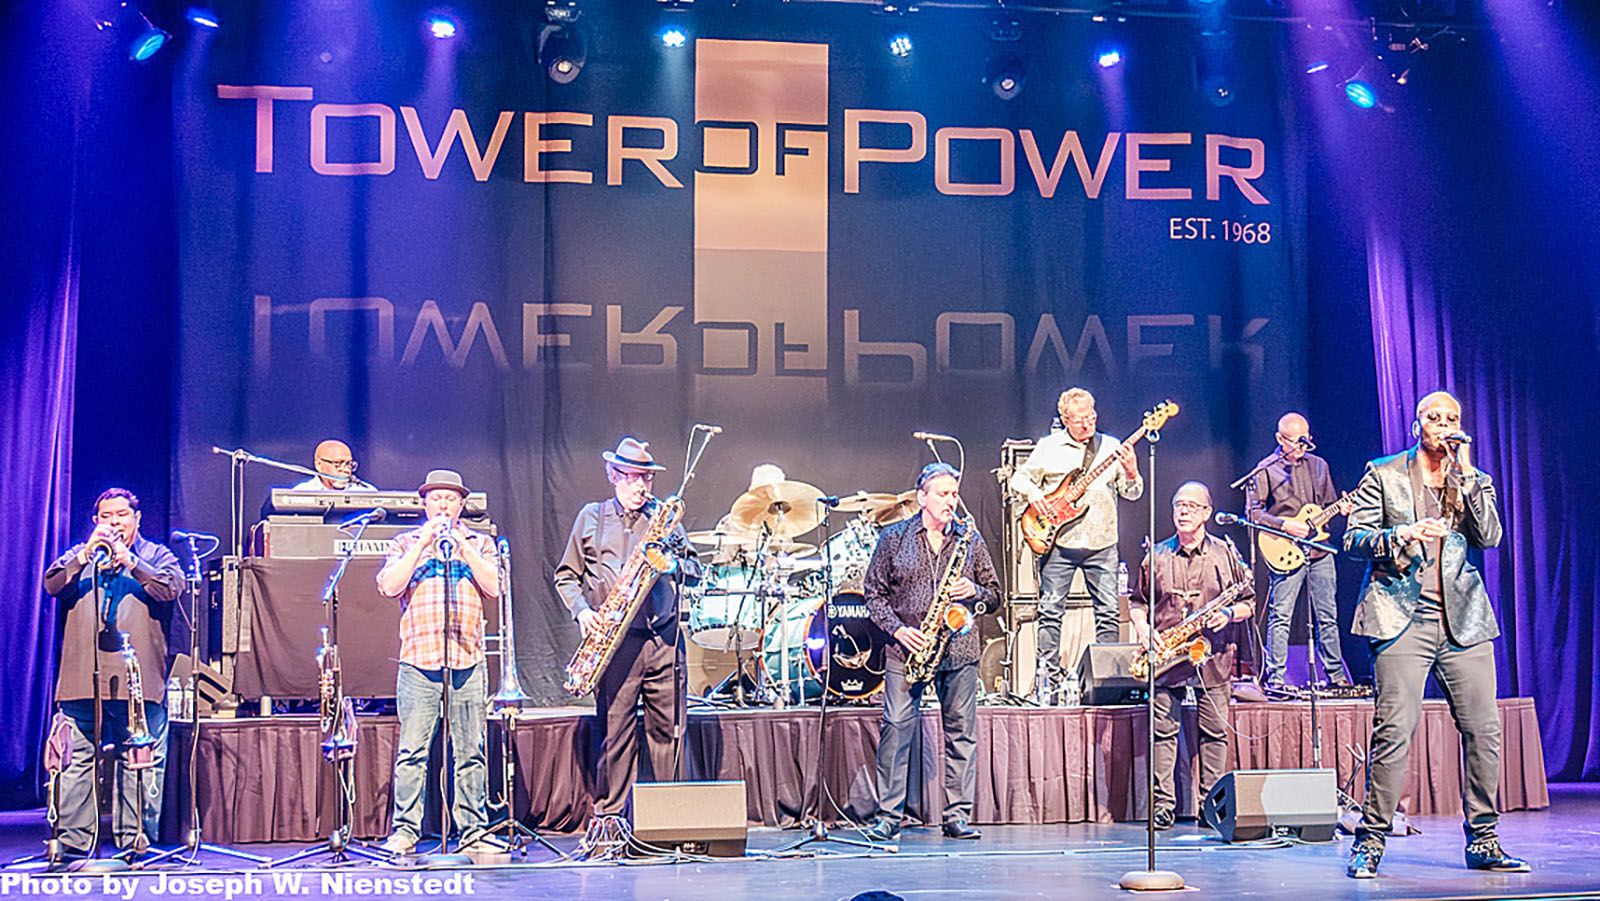 The funk/soul/R&B group Tower of Power will be at The Clyde Theatre on Thursday, Feb. 29, with The Sweetwater All Stars opening.